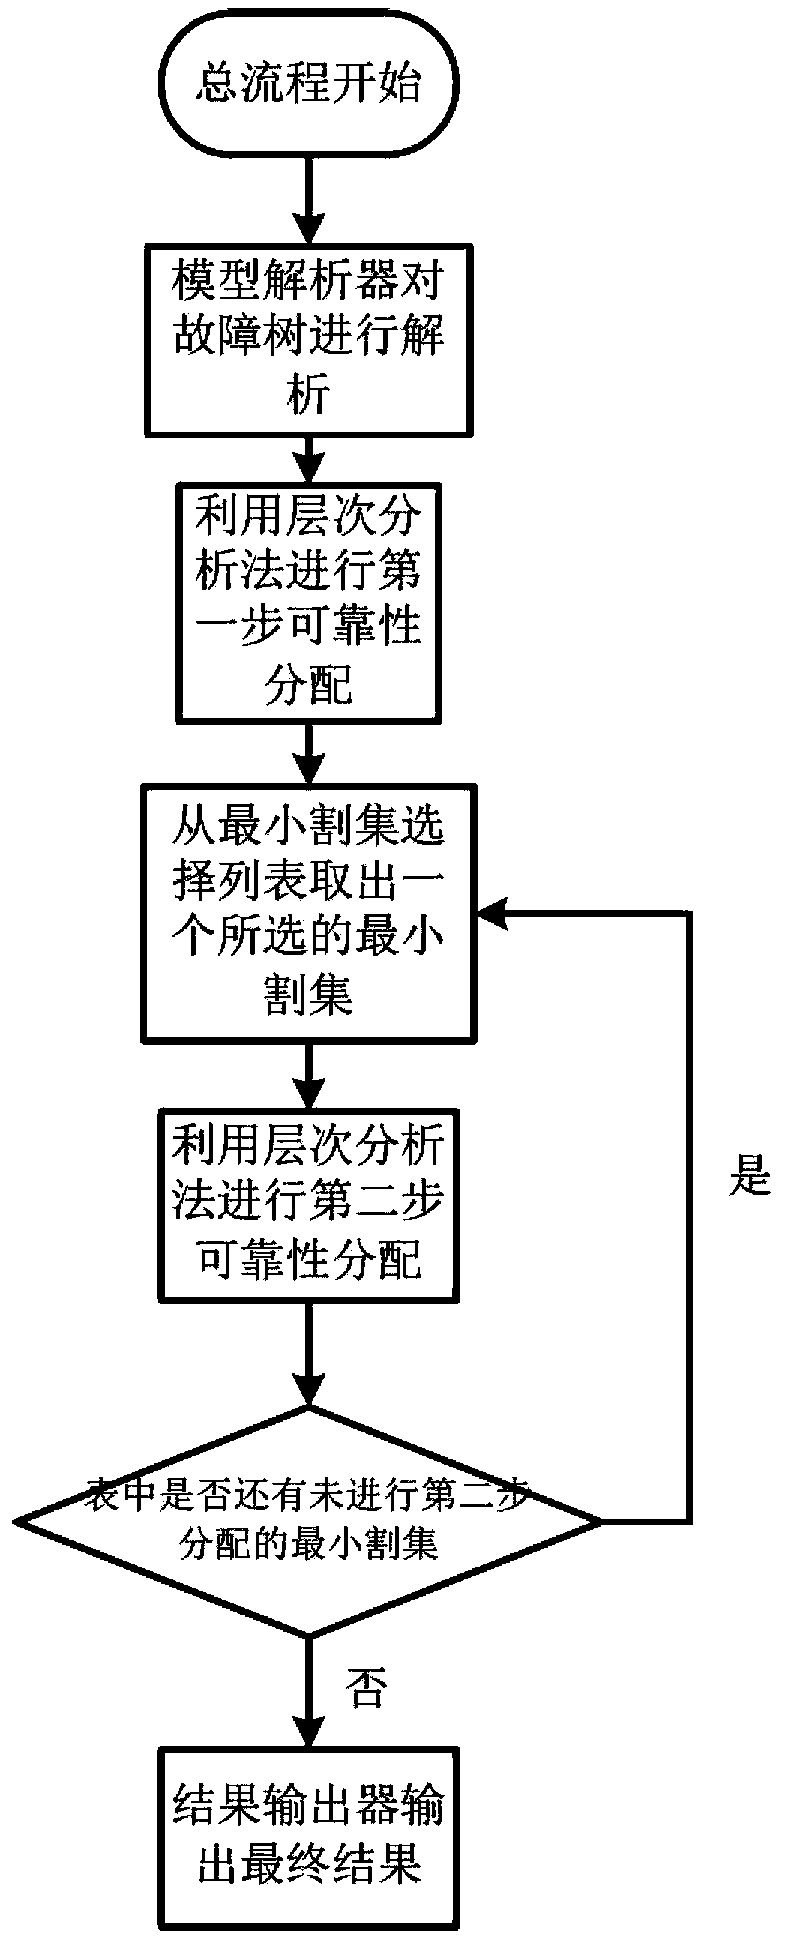 Reliability allocation system and allocation method based on fault tree and analytic hierarchy process